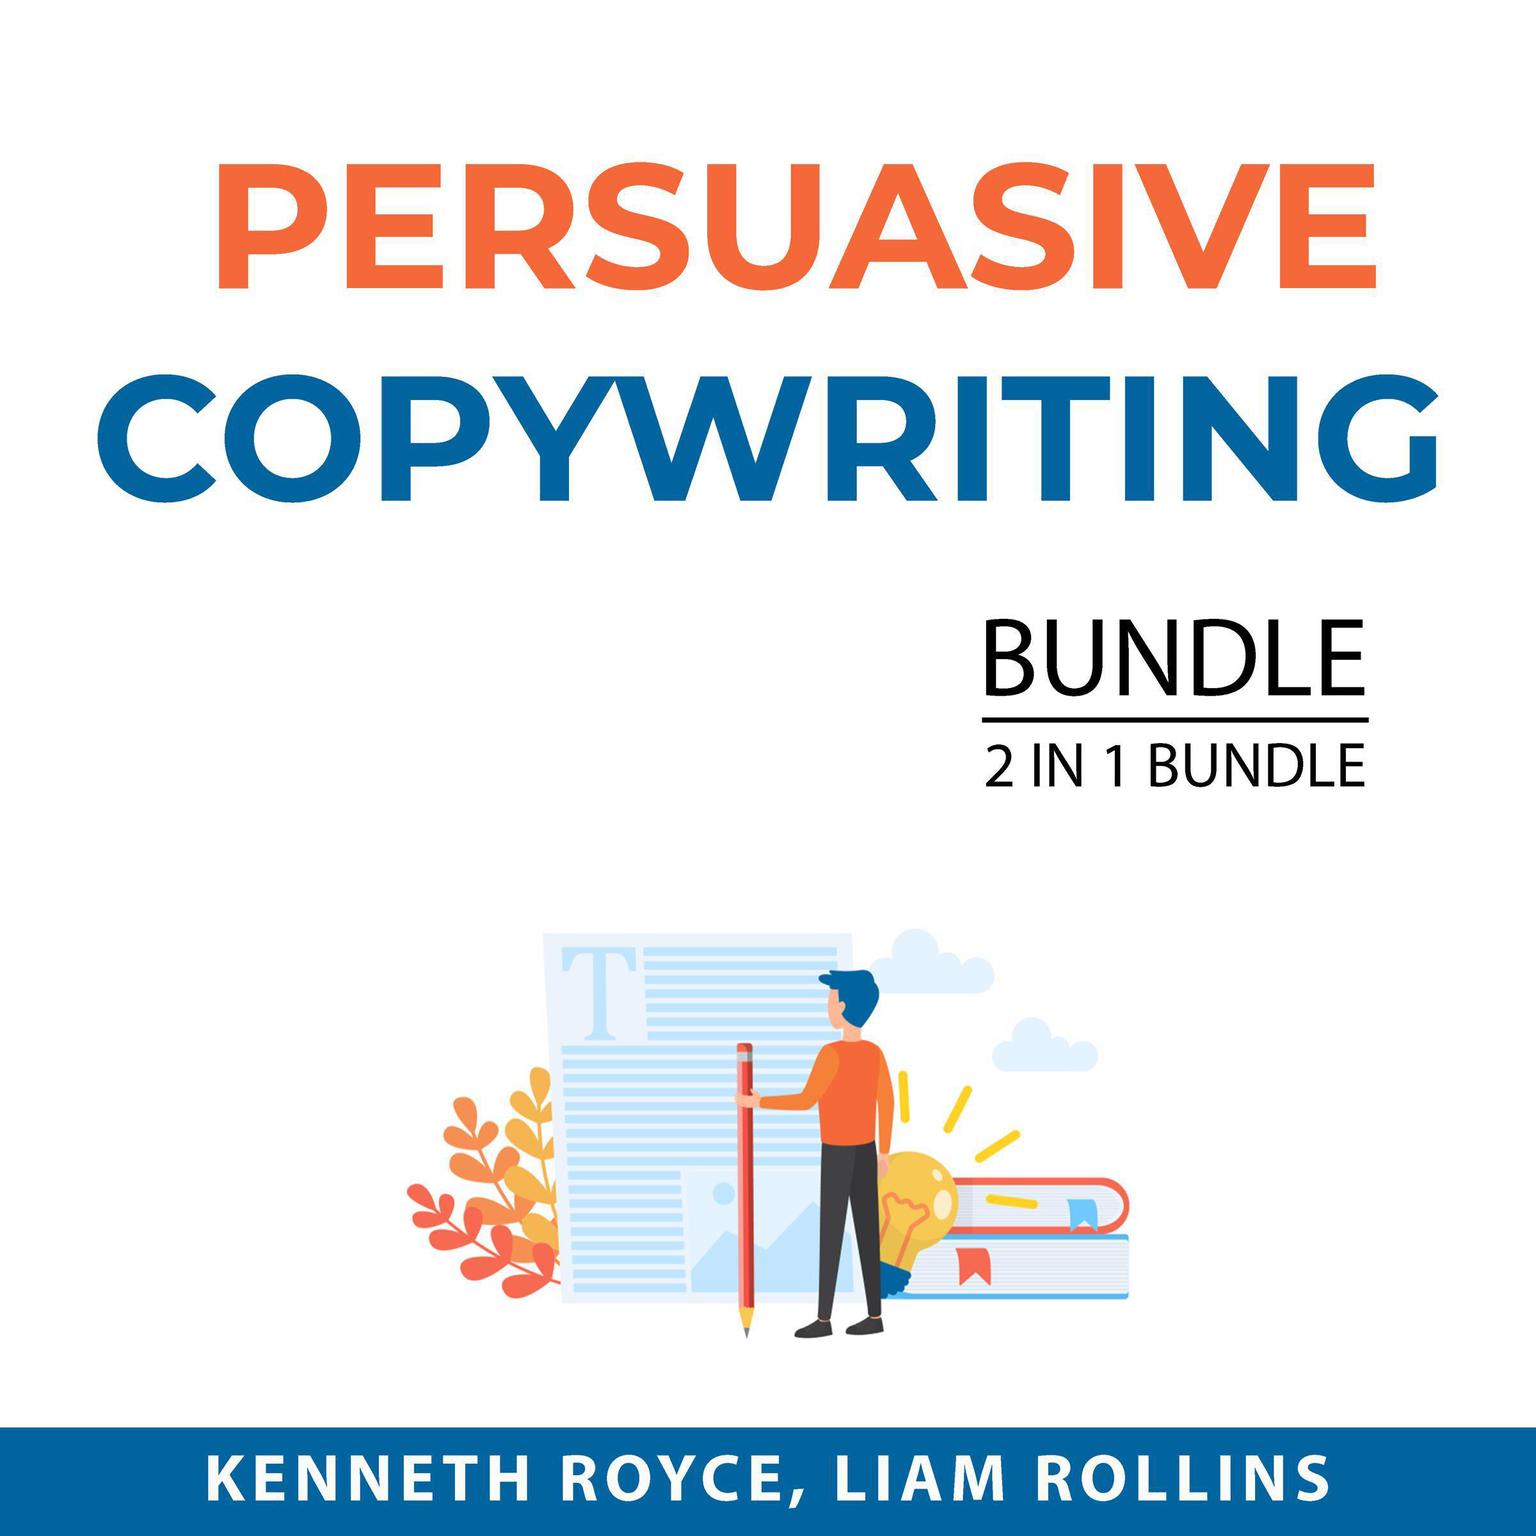 Persuasive Copywriting Bundle, 2 in 1 Bundle: Boost Writing and How to Write Copy That Sells Audiobook, by Kenneth Royce